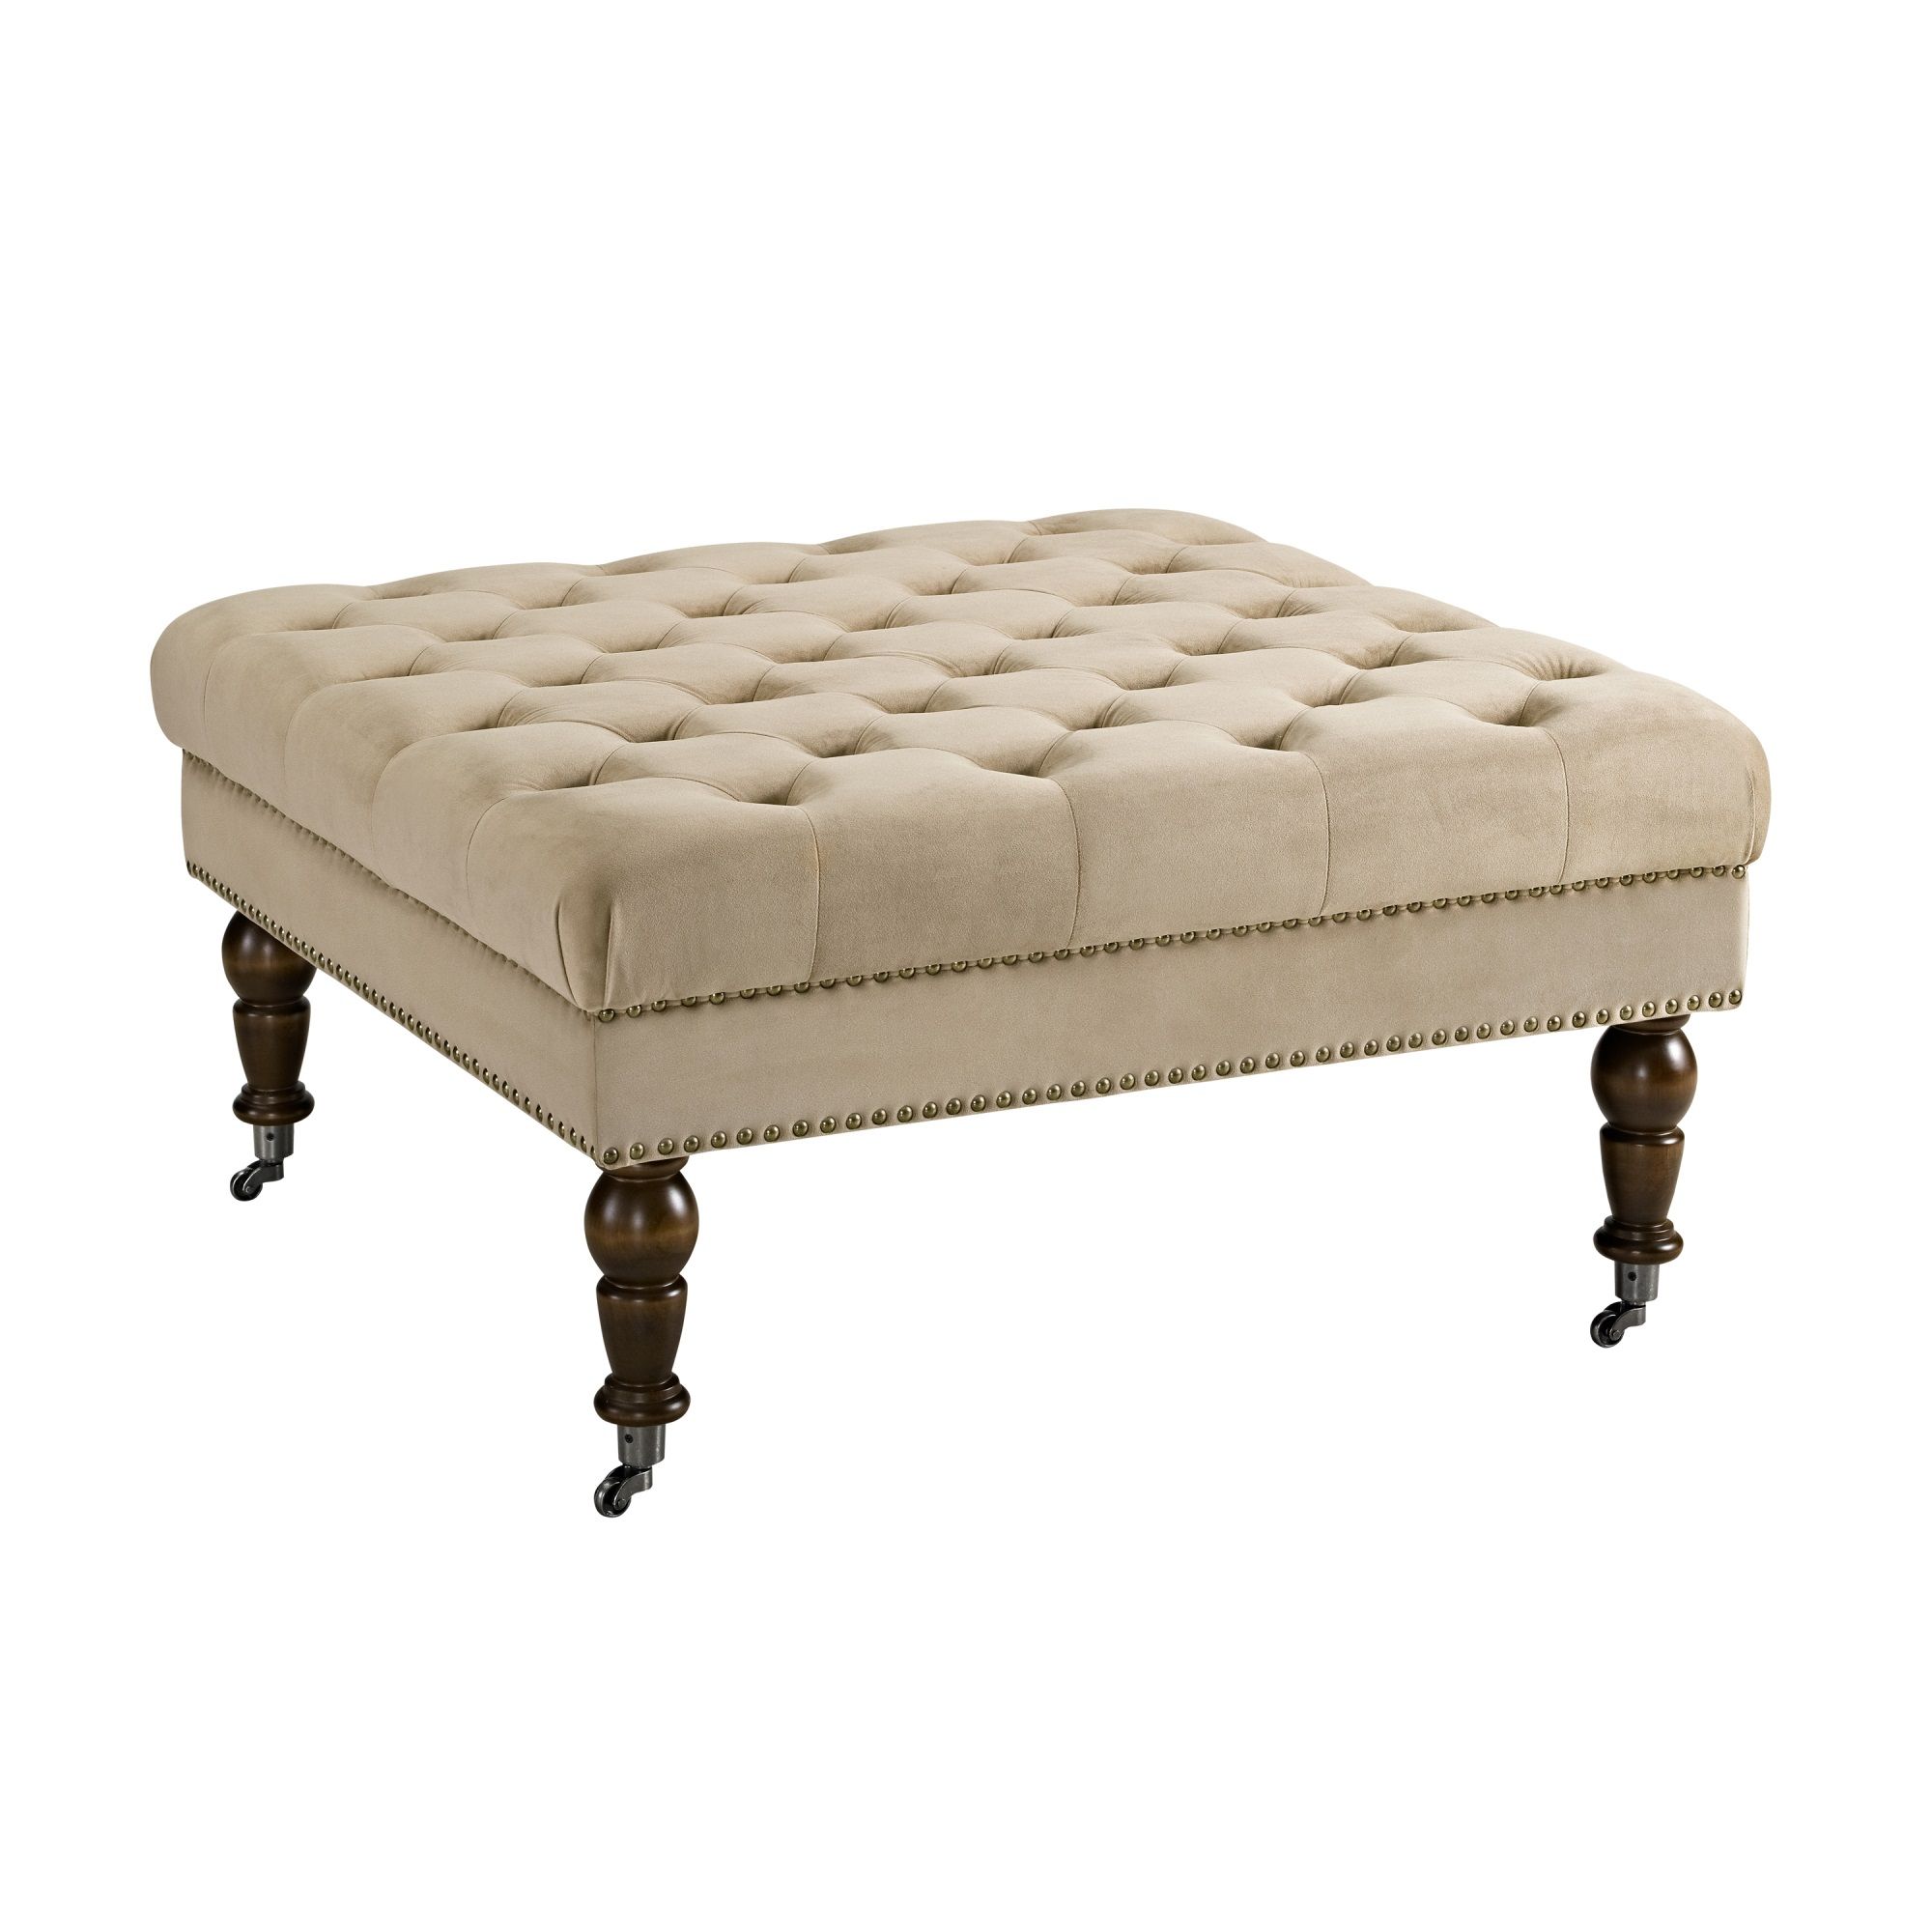 Velvet Upholstered Square Tufted Ottoman With Casters, Beige And Brown Regarding Brown And Gray Button Tufted Ottomans (View 7 of 20)